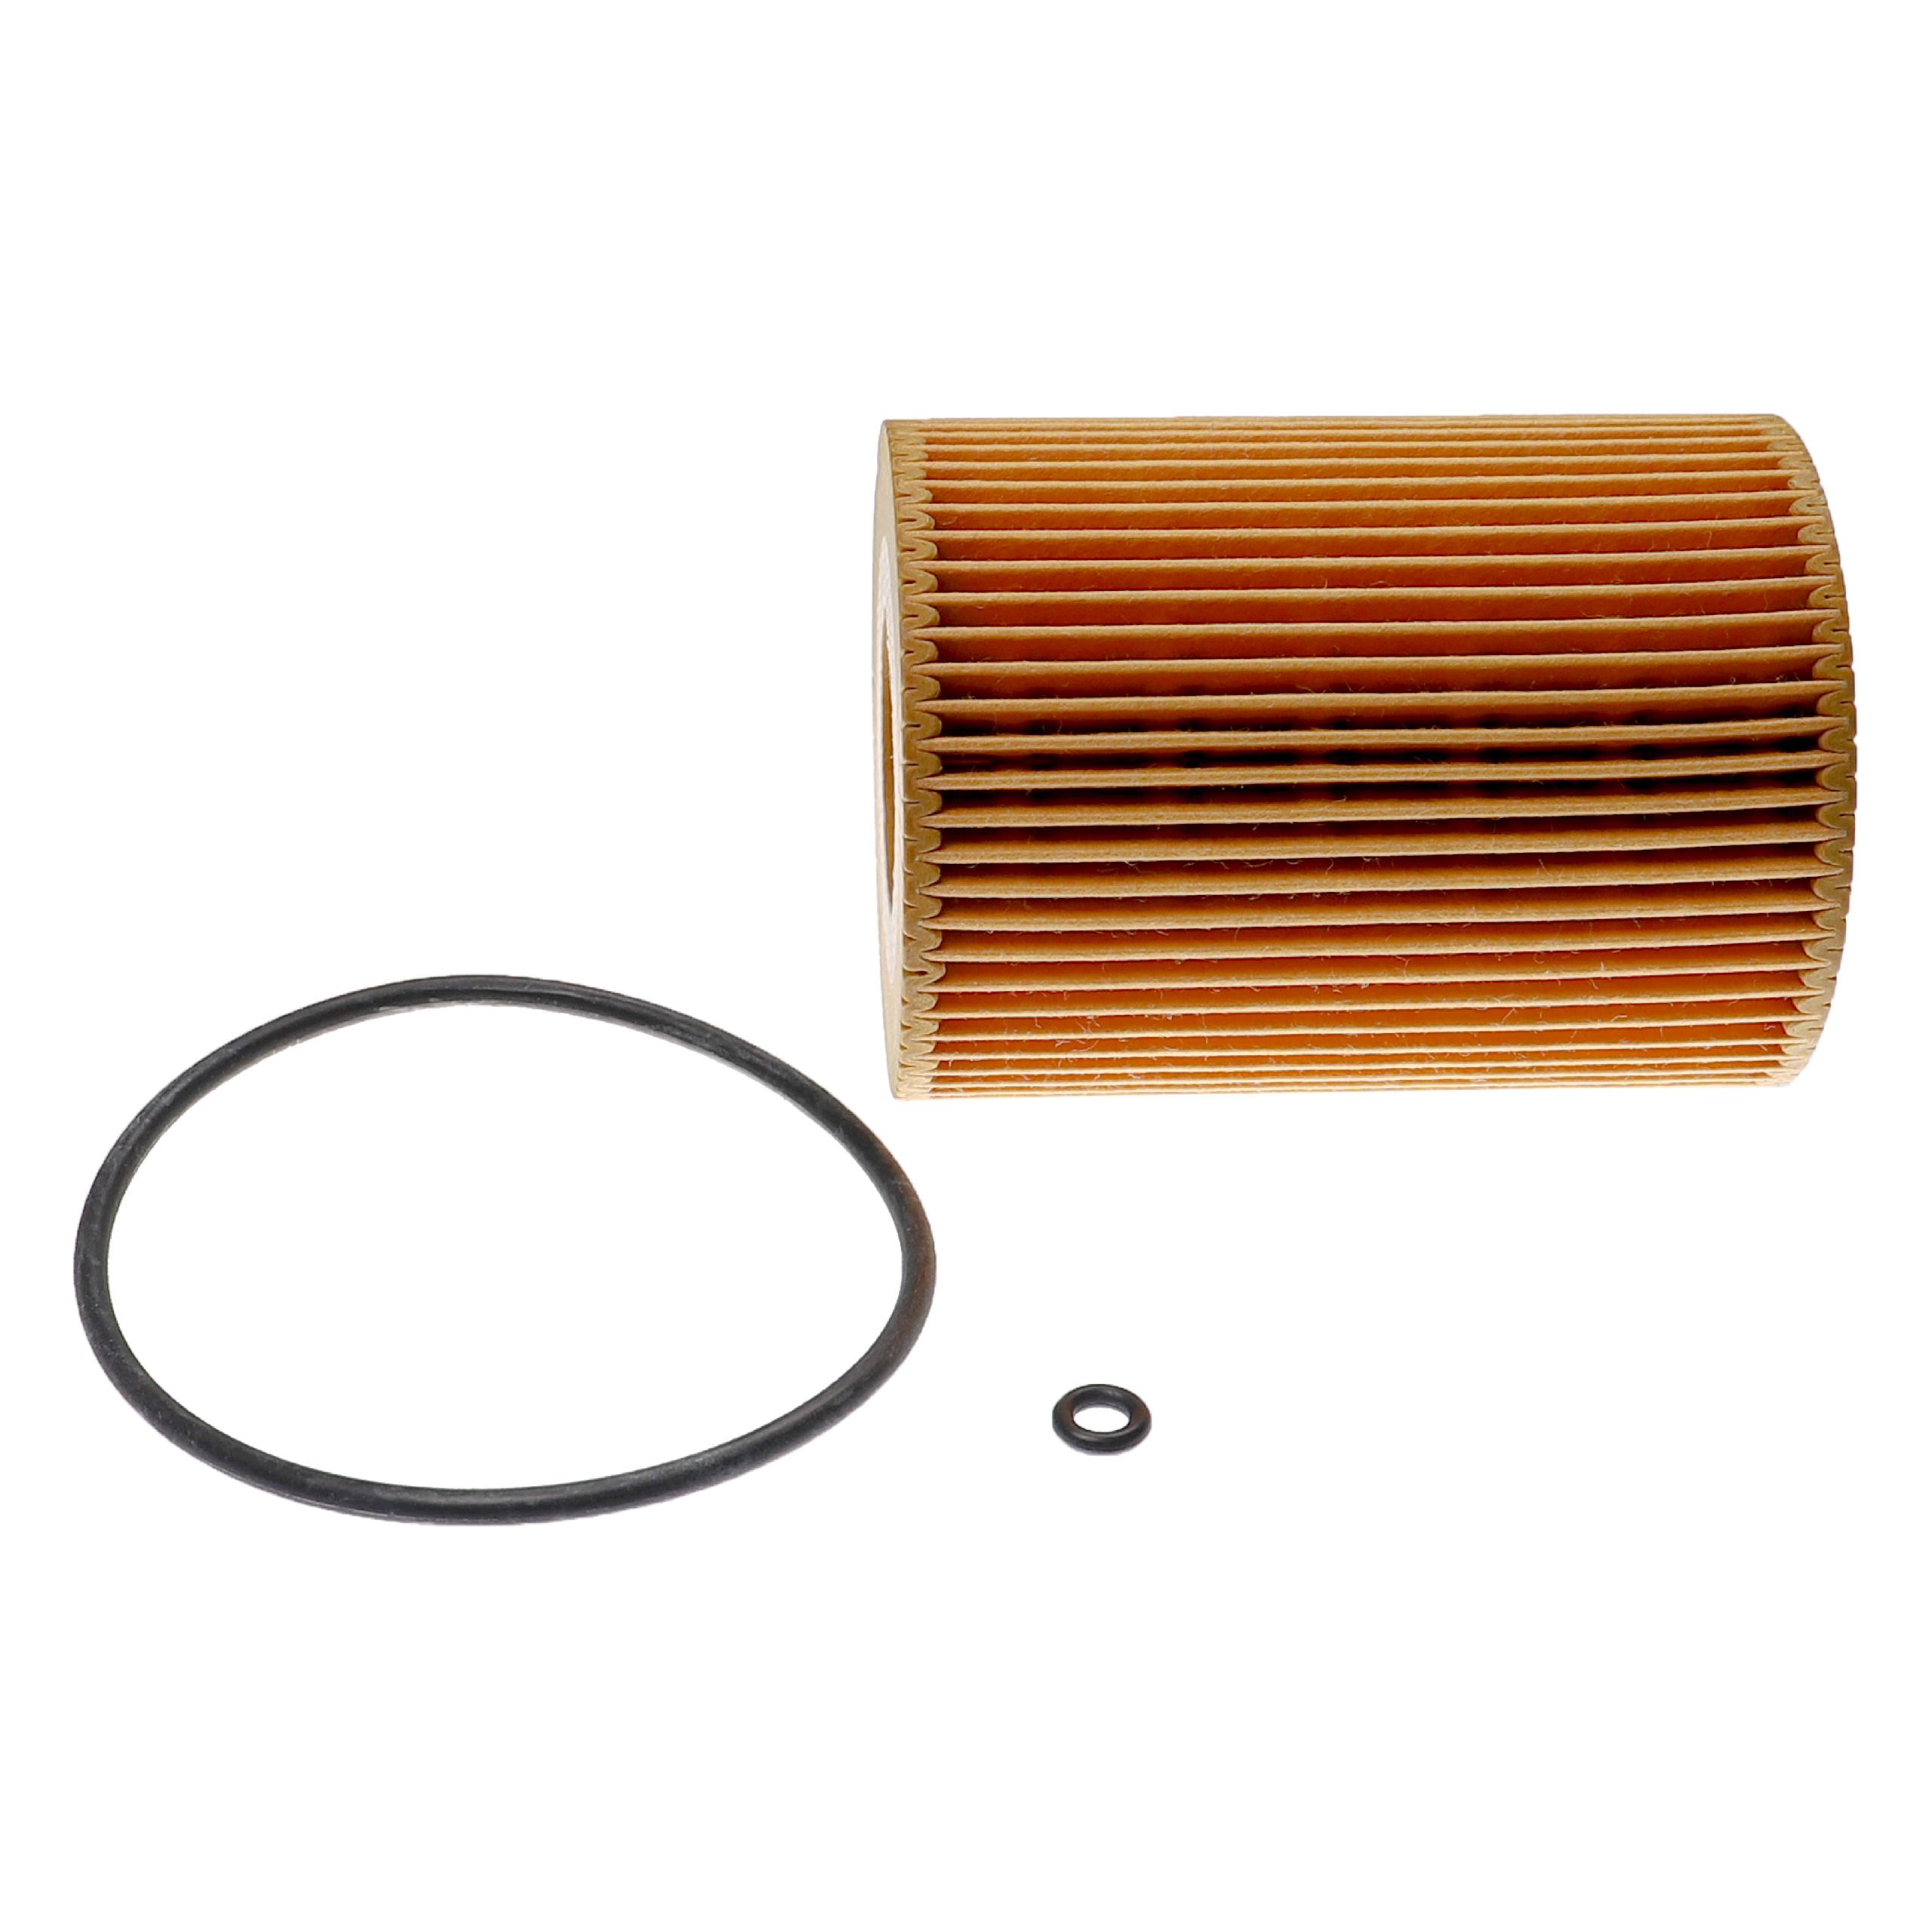 Vehicle Oil Filter as Replacement for A.L. filter ALO-8165 - Spare Filter